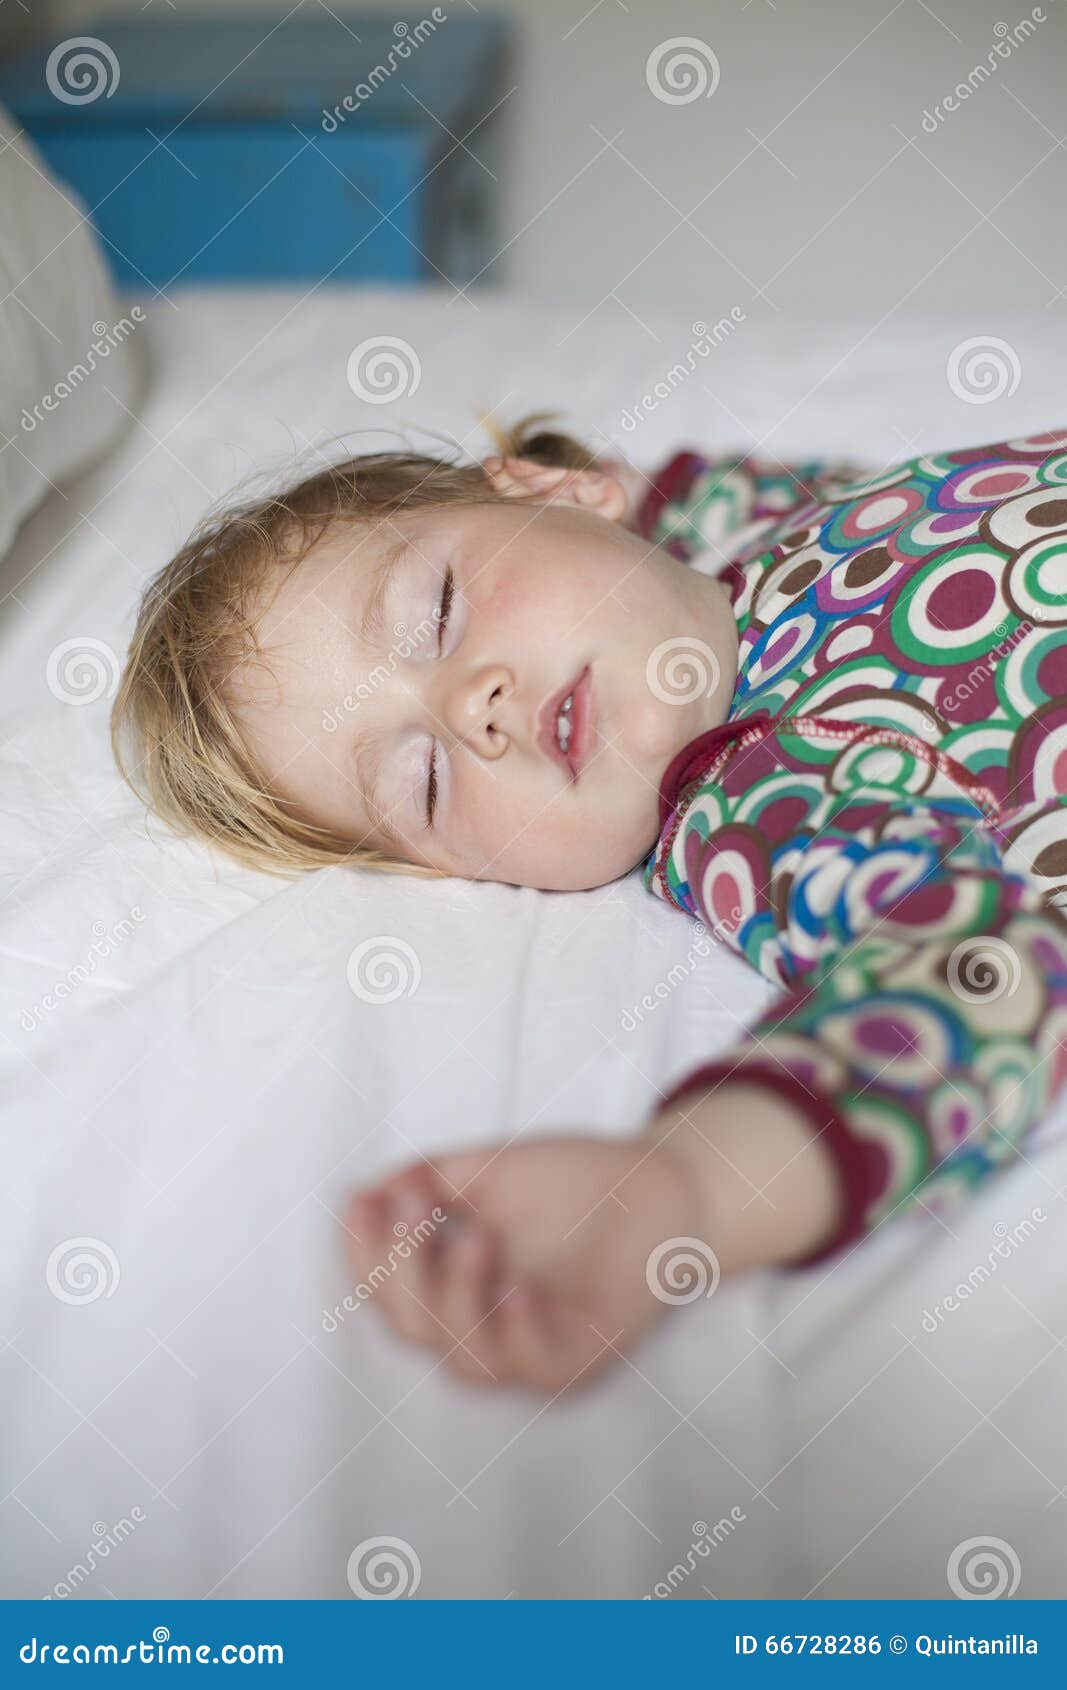 Baby face sleeping on bed stock photo. Image of ...